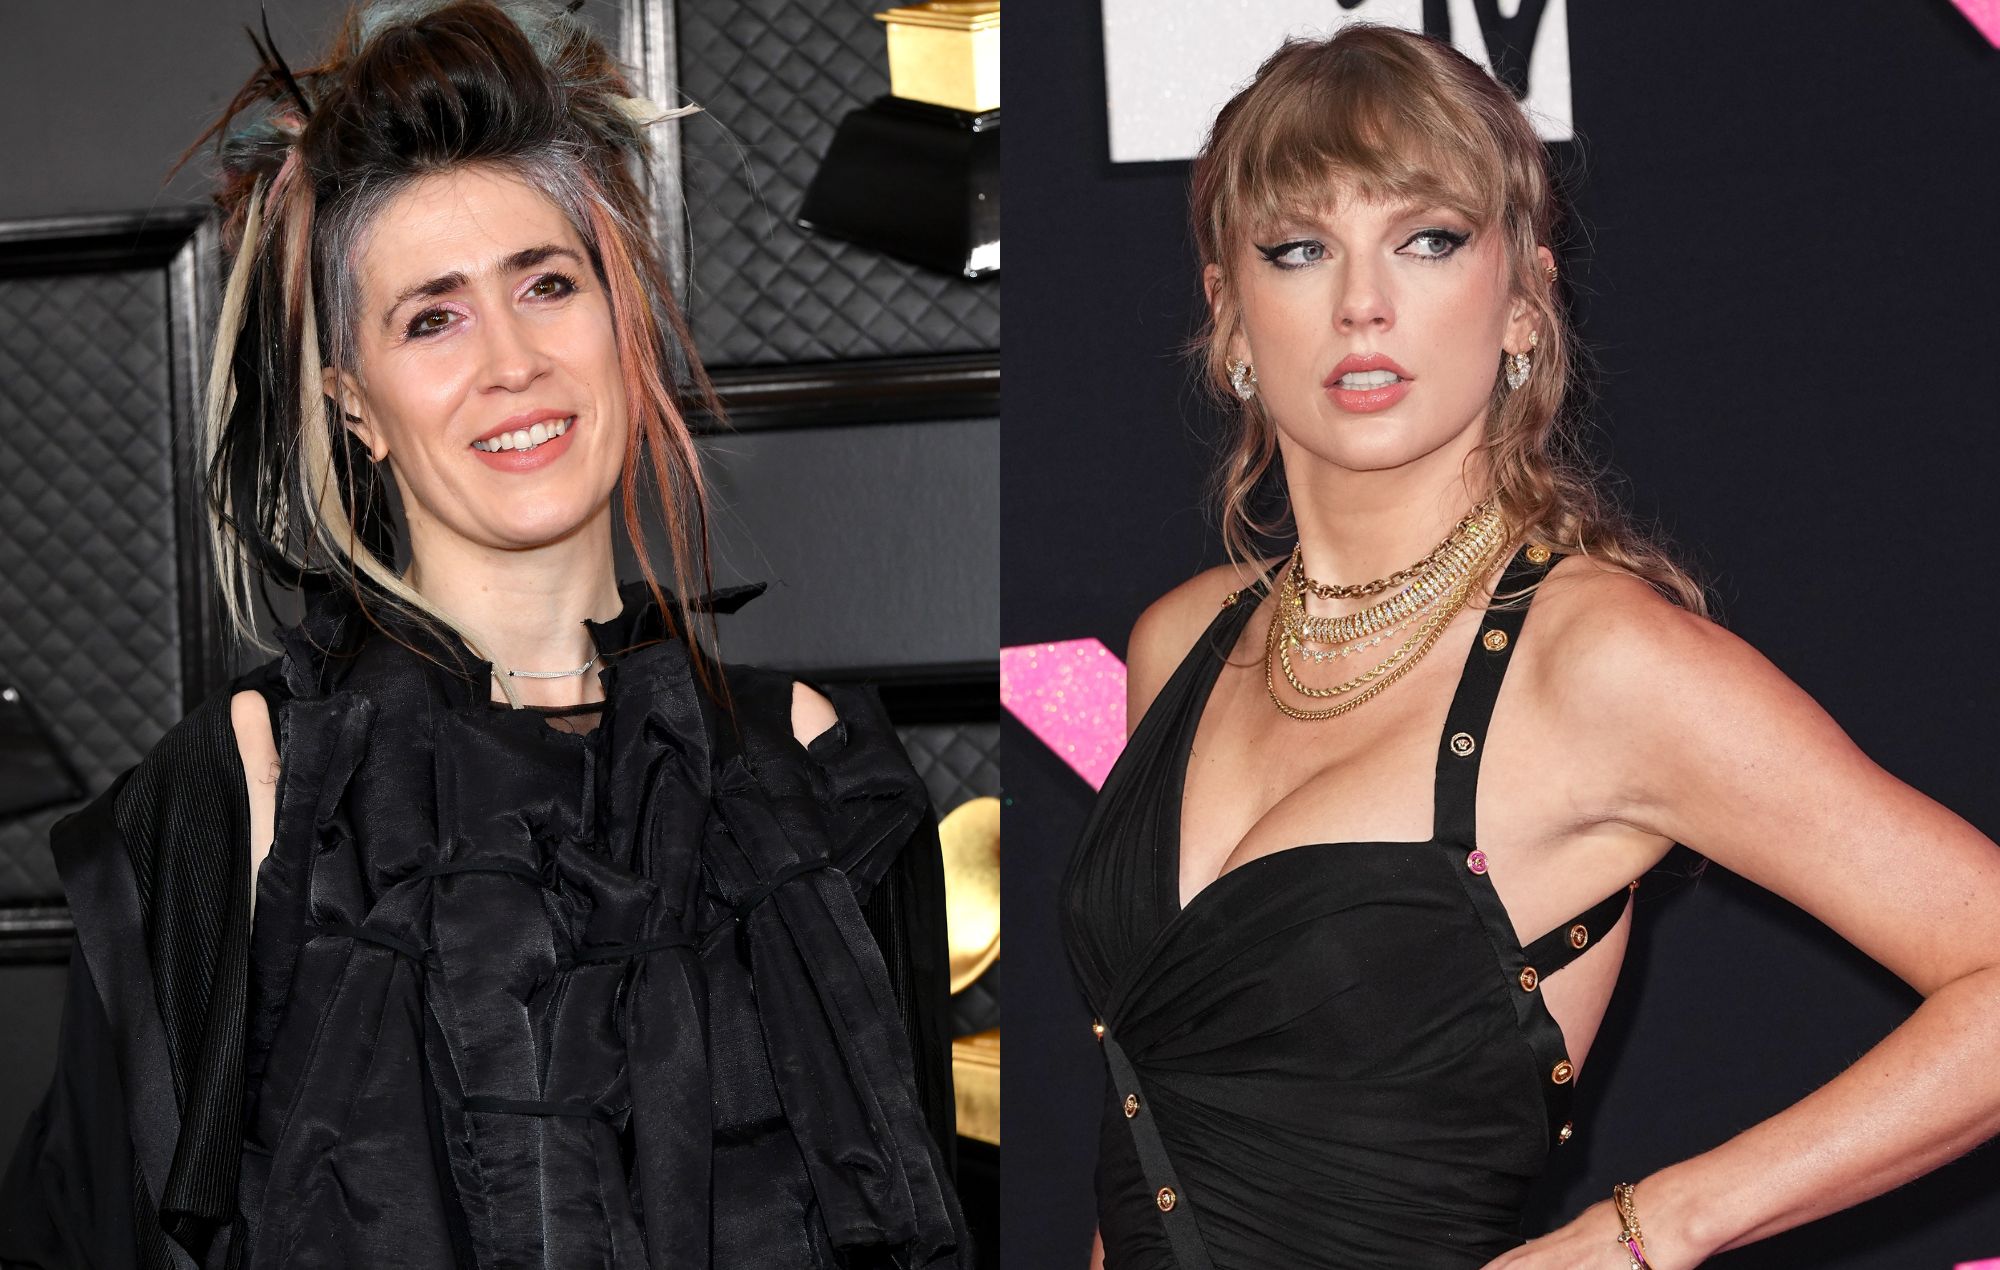 Imogen Heap shares studio photos from ‘1989 (Taylor’s Version)’ session